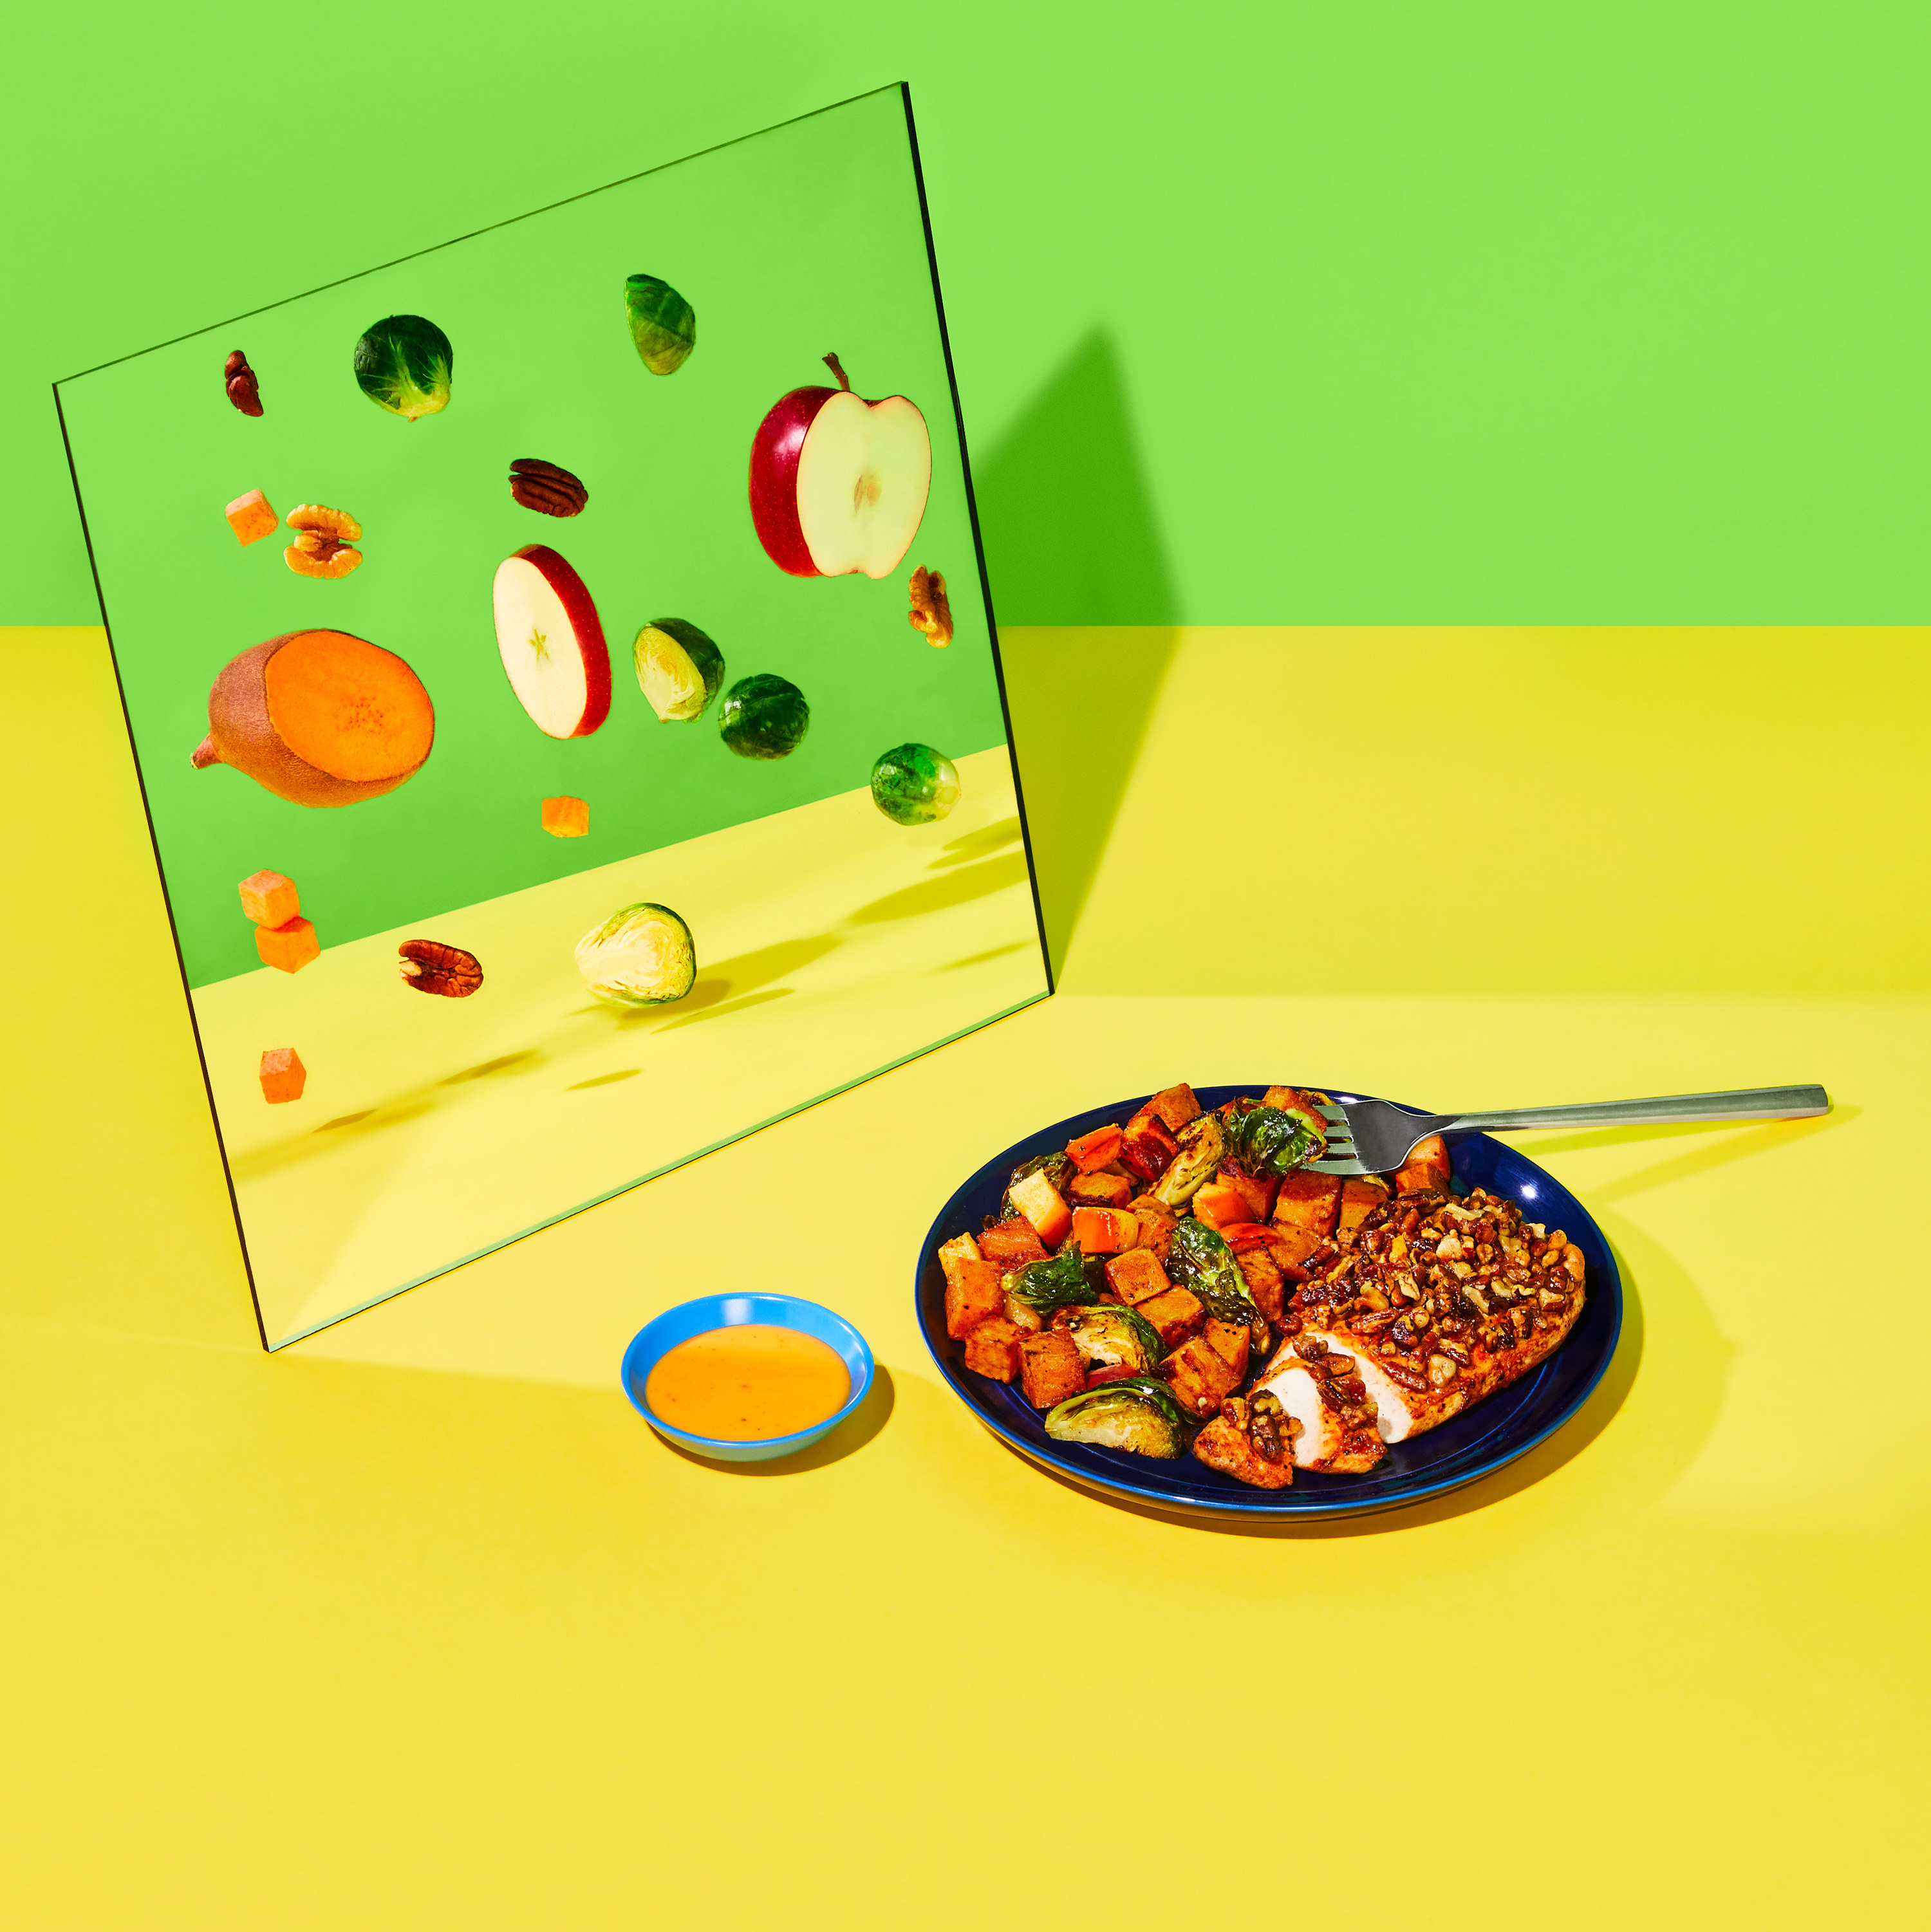 A HelloFresh meal looking into a mirror revealing the ingredients that went into the dish.